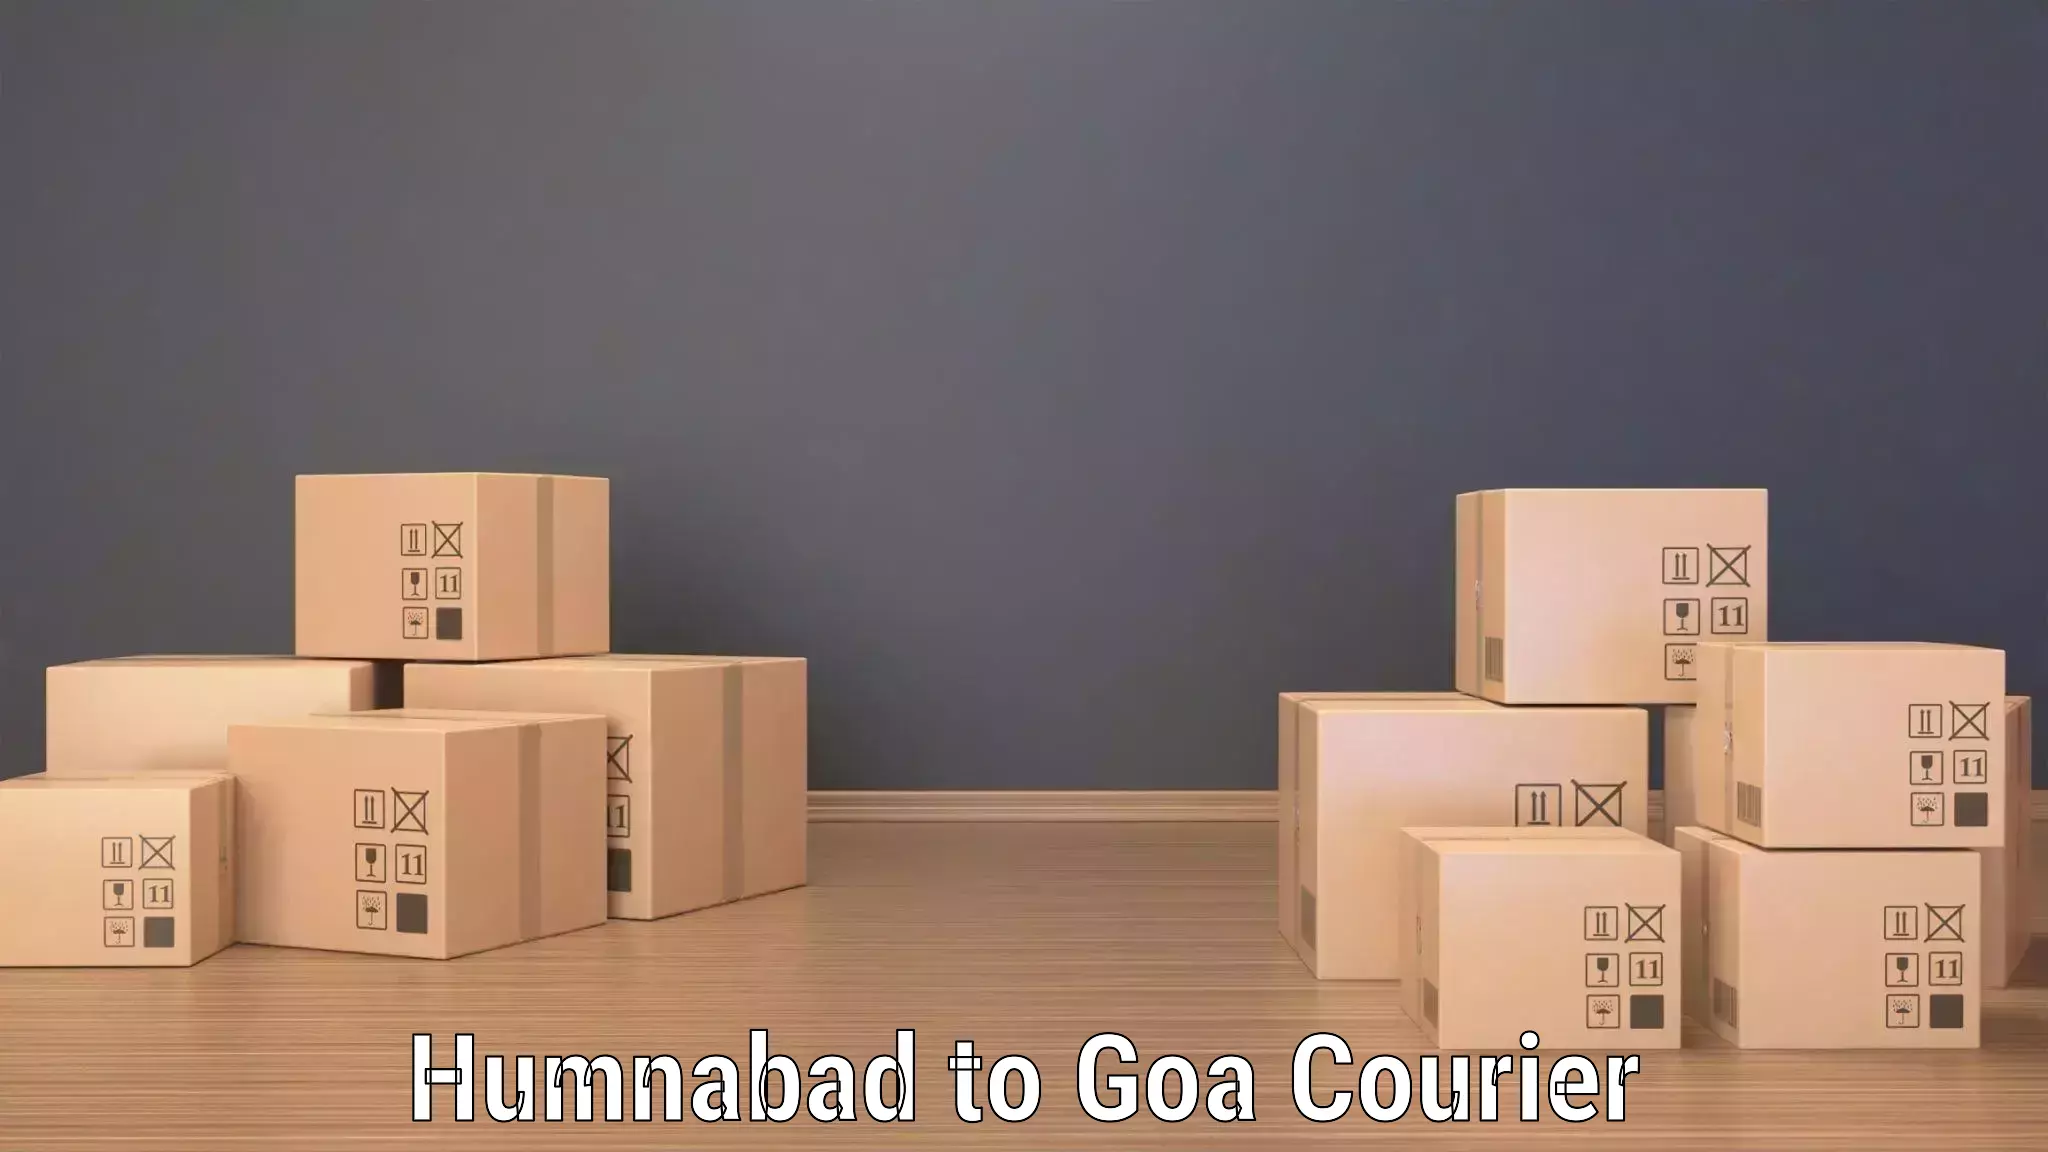 Business logistics support in Humnabad to Panaji